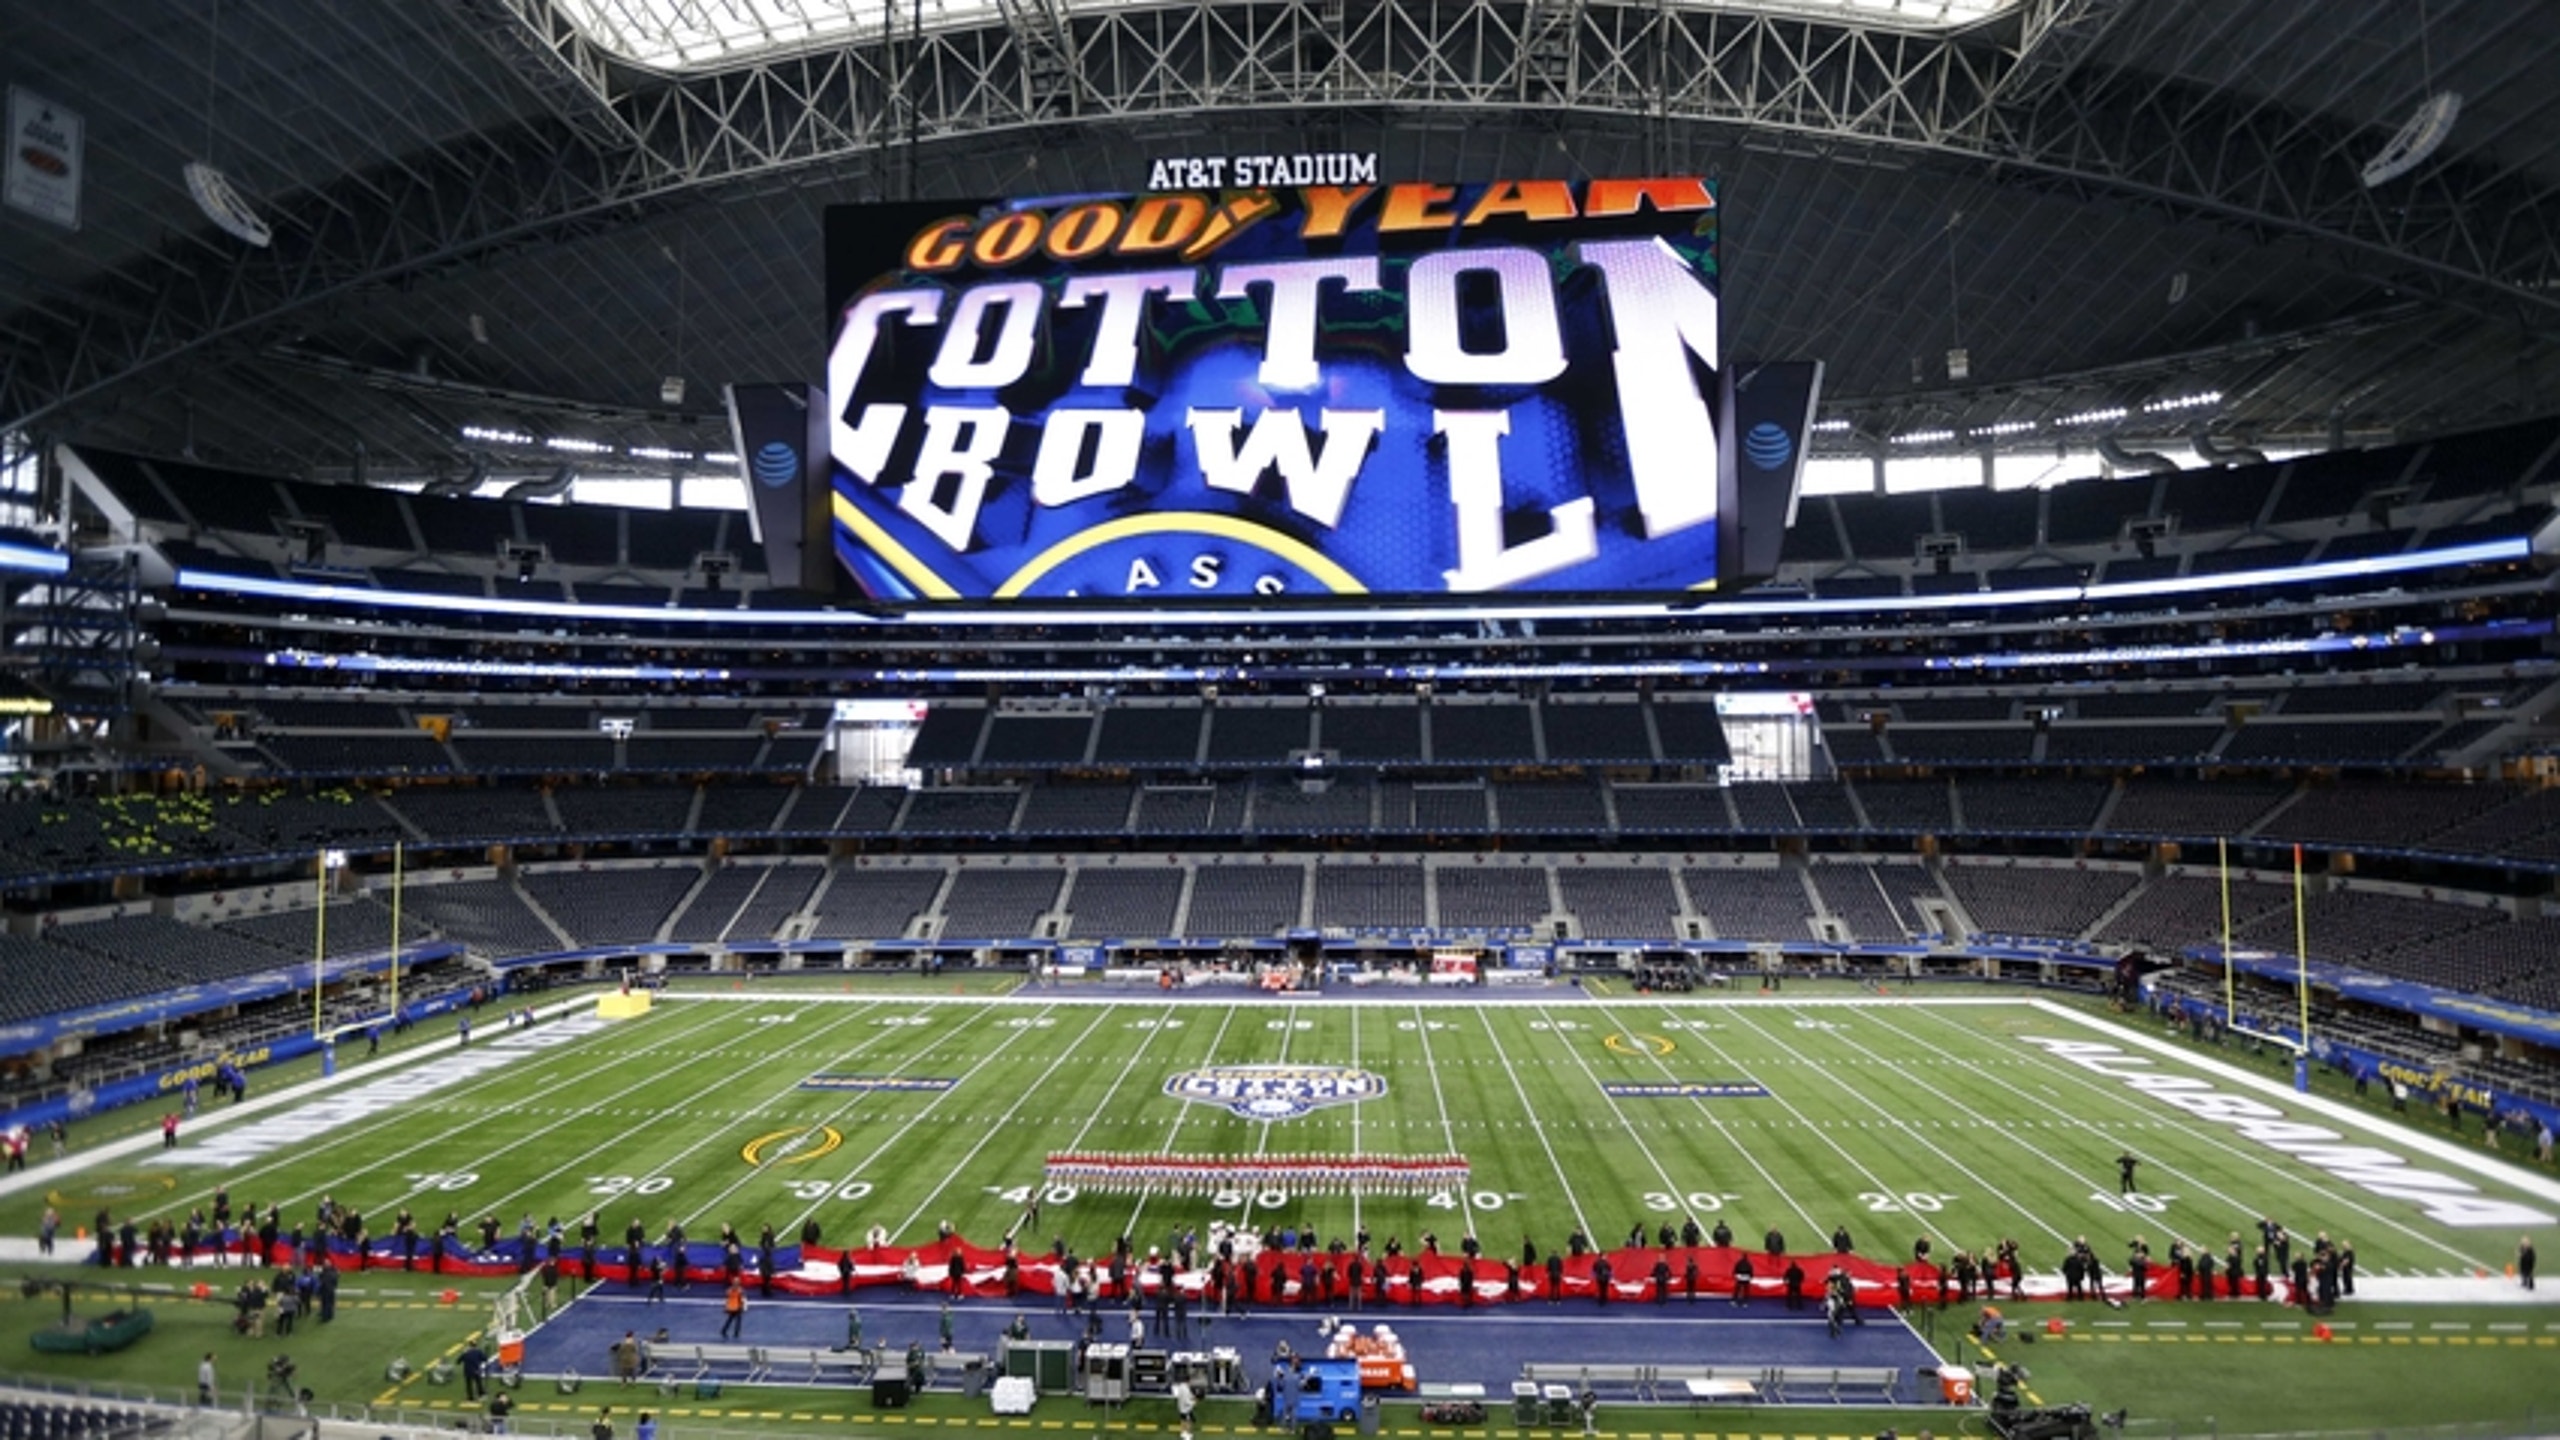 Goodyear Cotton Bowl Classic How to Watch Wisconsin Badgers take on